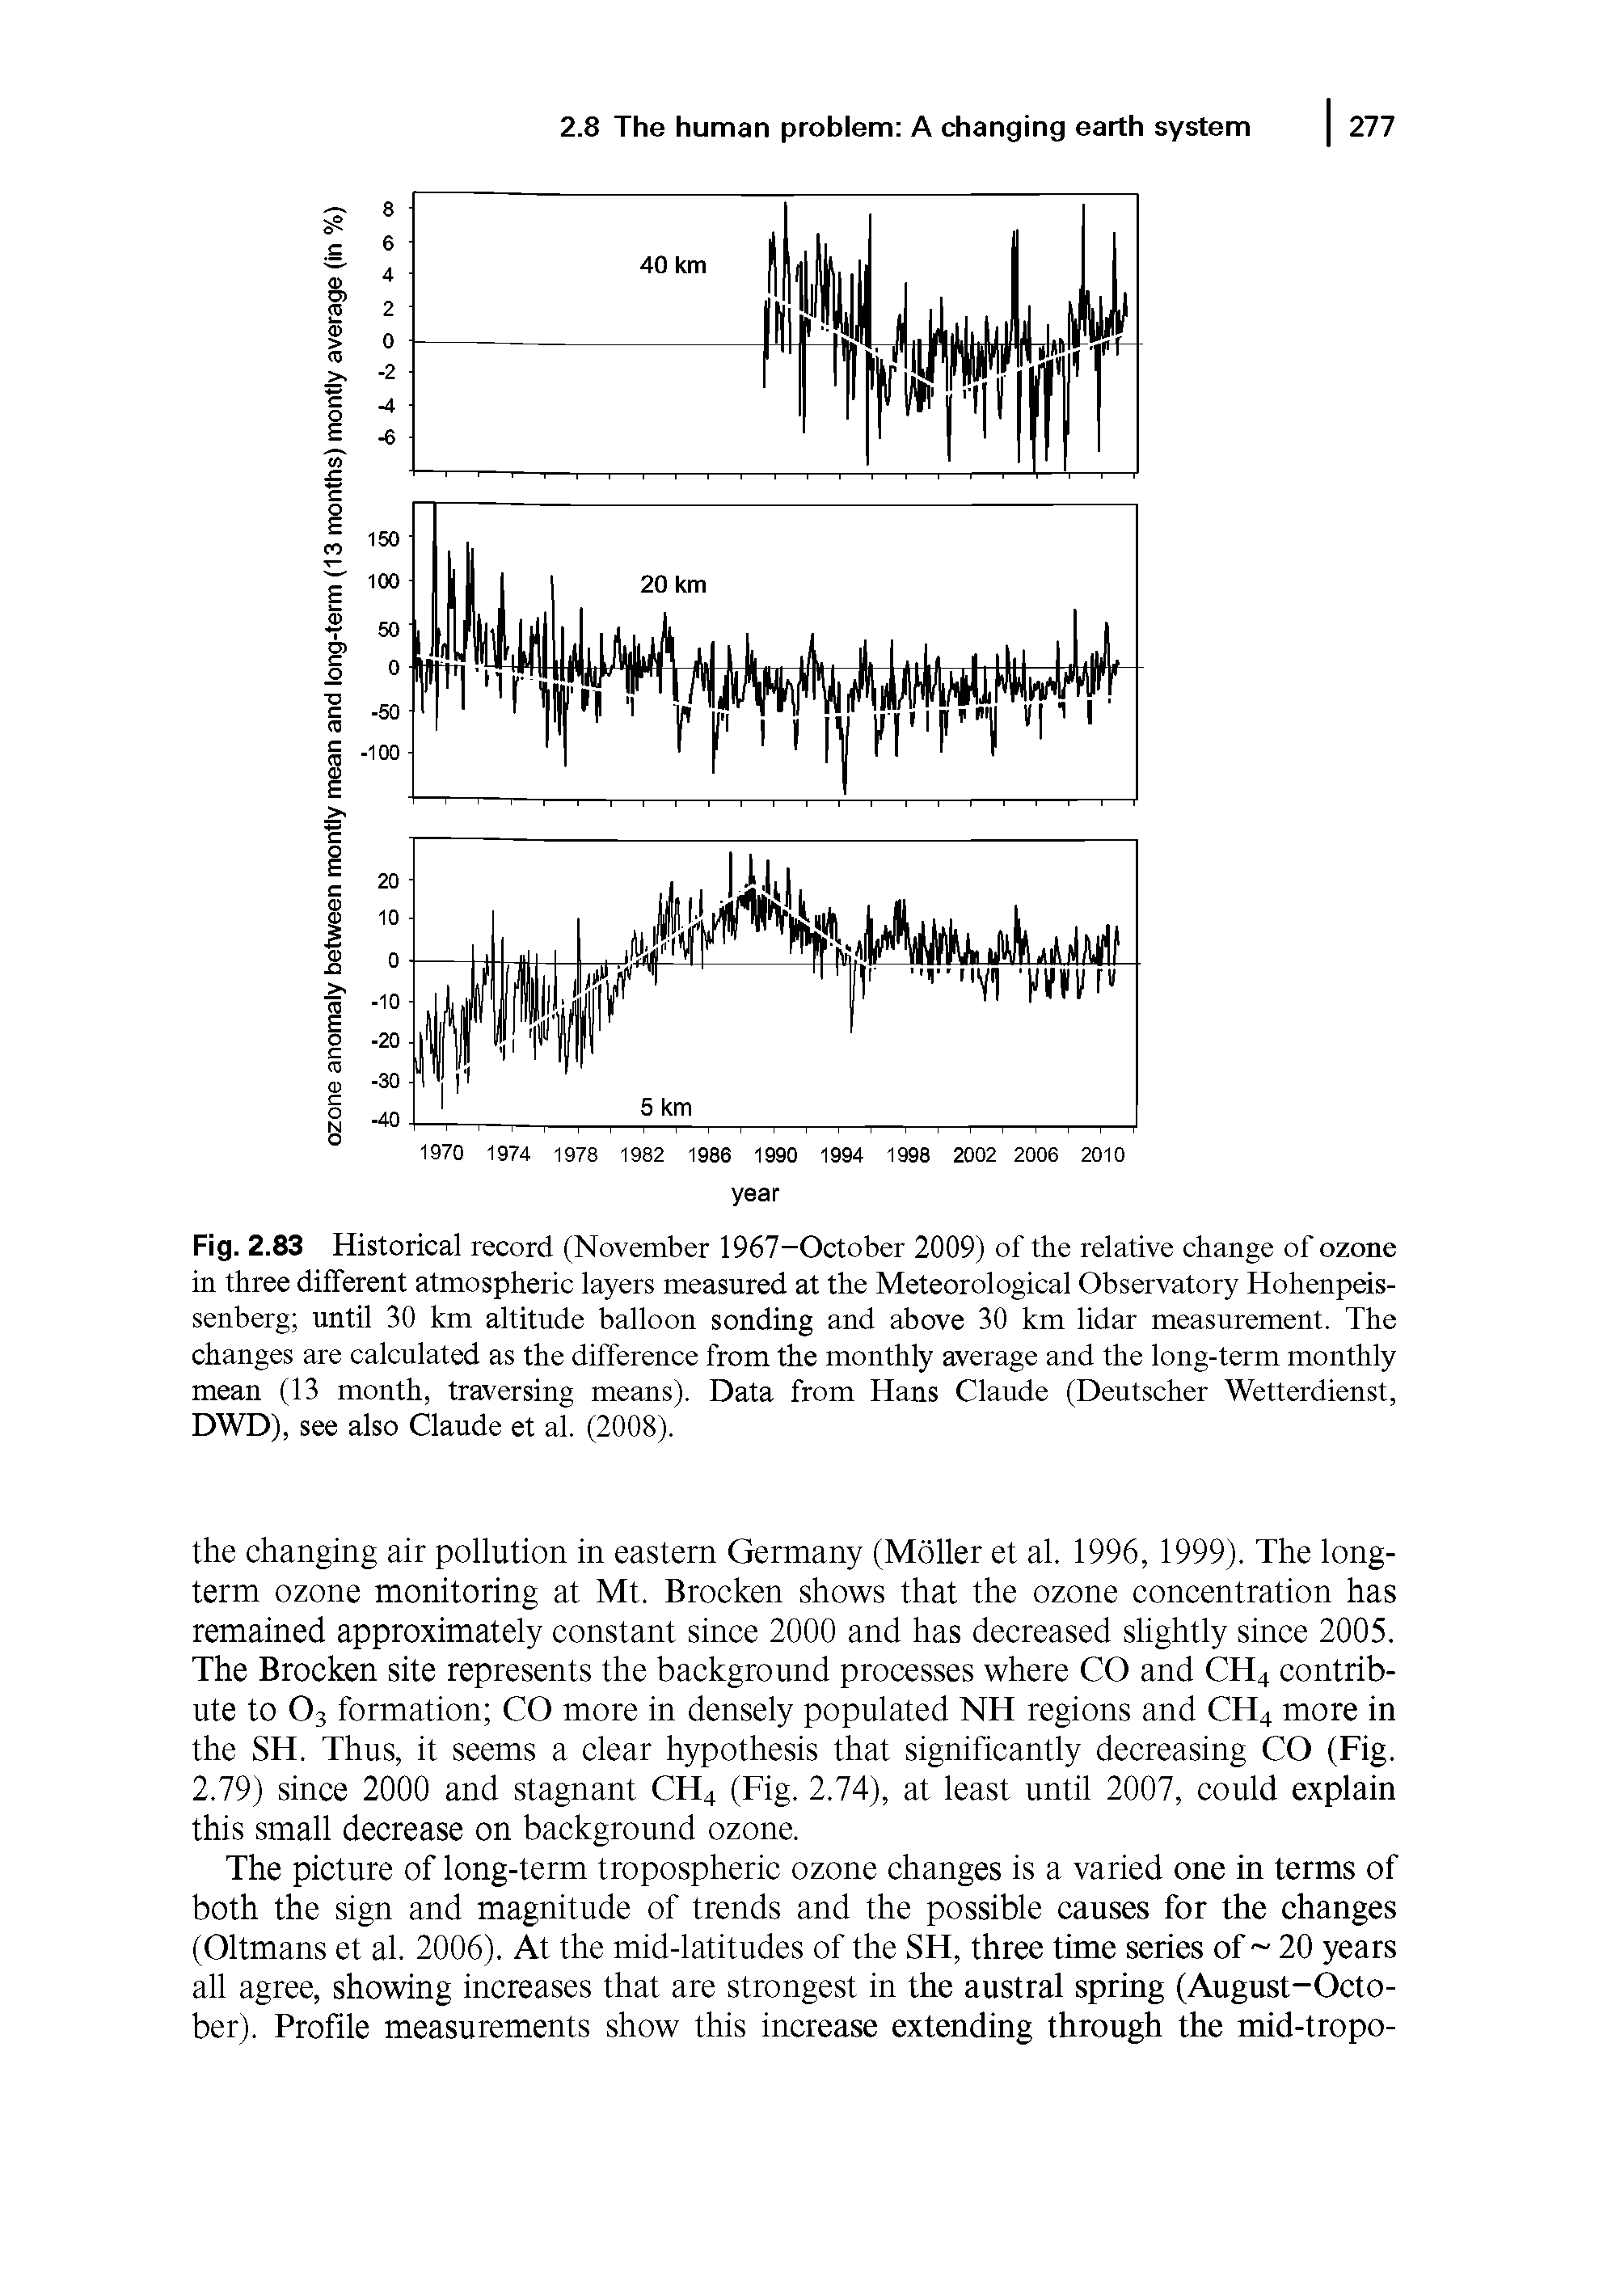 Fig. 2.83 Historical record (November 1967-October 2009) of the relative change of ozone in three different atmospheric layers measured at the Meteorological Observatory Hohenpeis-senberg until 30 km altitude balloon sonding and above 30 km lidar measurement. The changes are calculated as the difference from the monthly average and the long-term monthly mean (13 month, traversing means). Data from Hans Claude (Deutscher Wetterdienst, DWD), see also Claude et al. (2008).